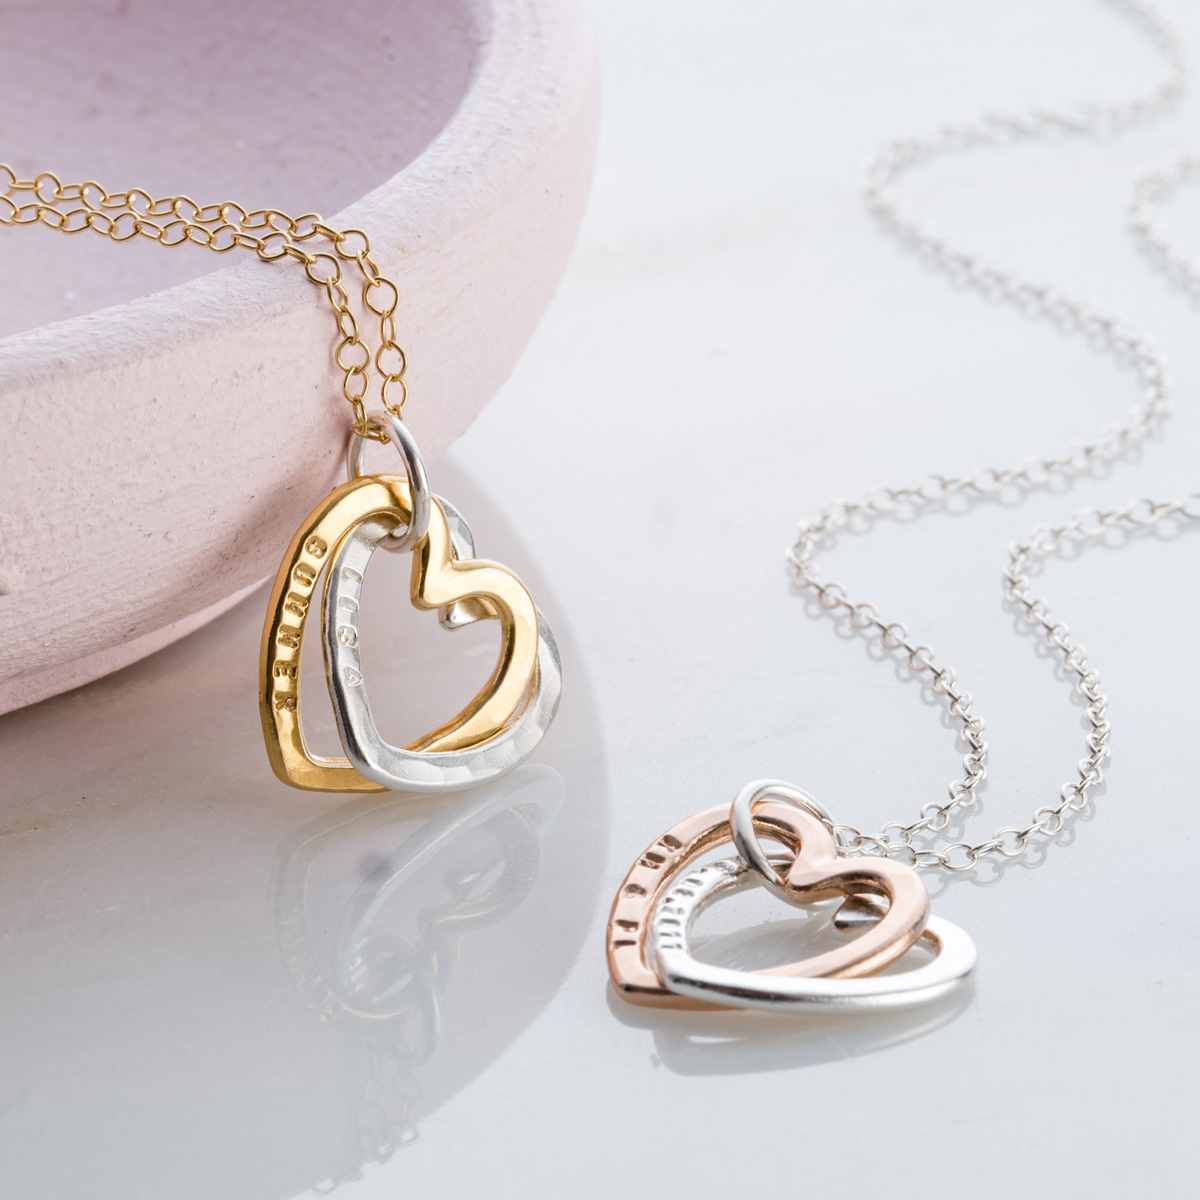 Personalised Posh Totty Designs Interlinking Hearts Necklace With Gold